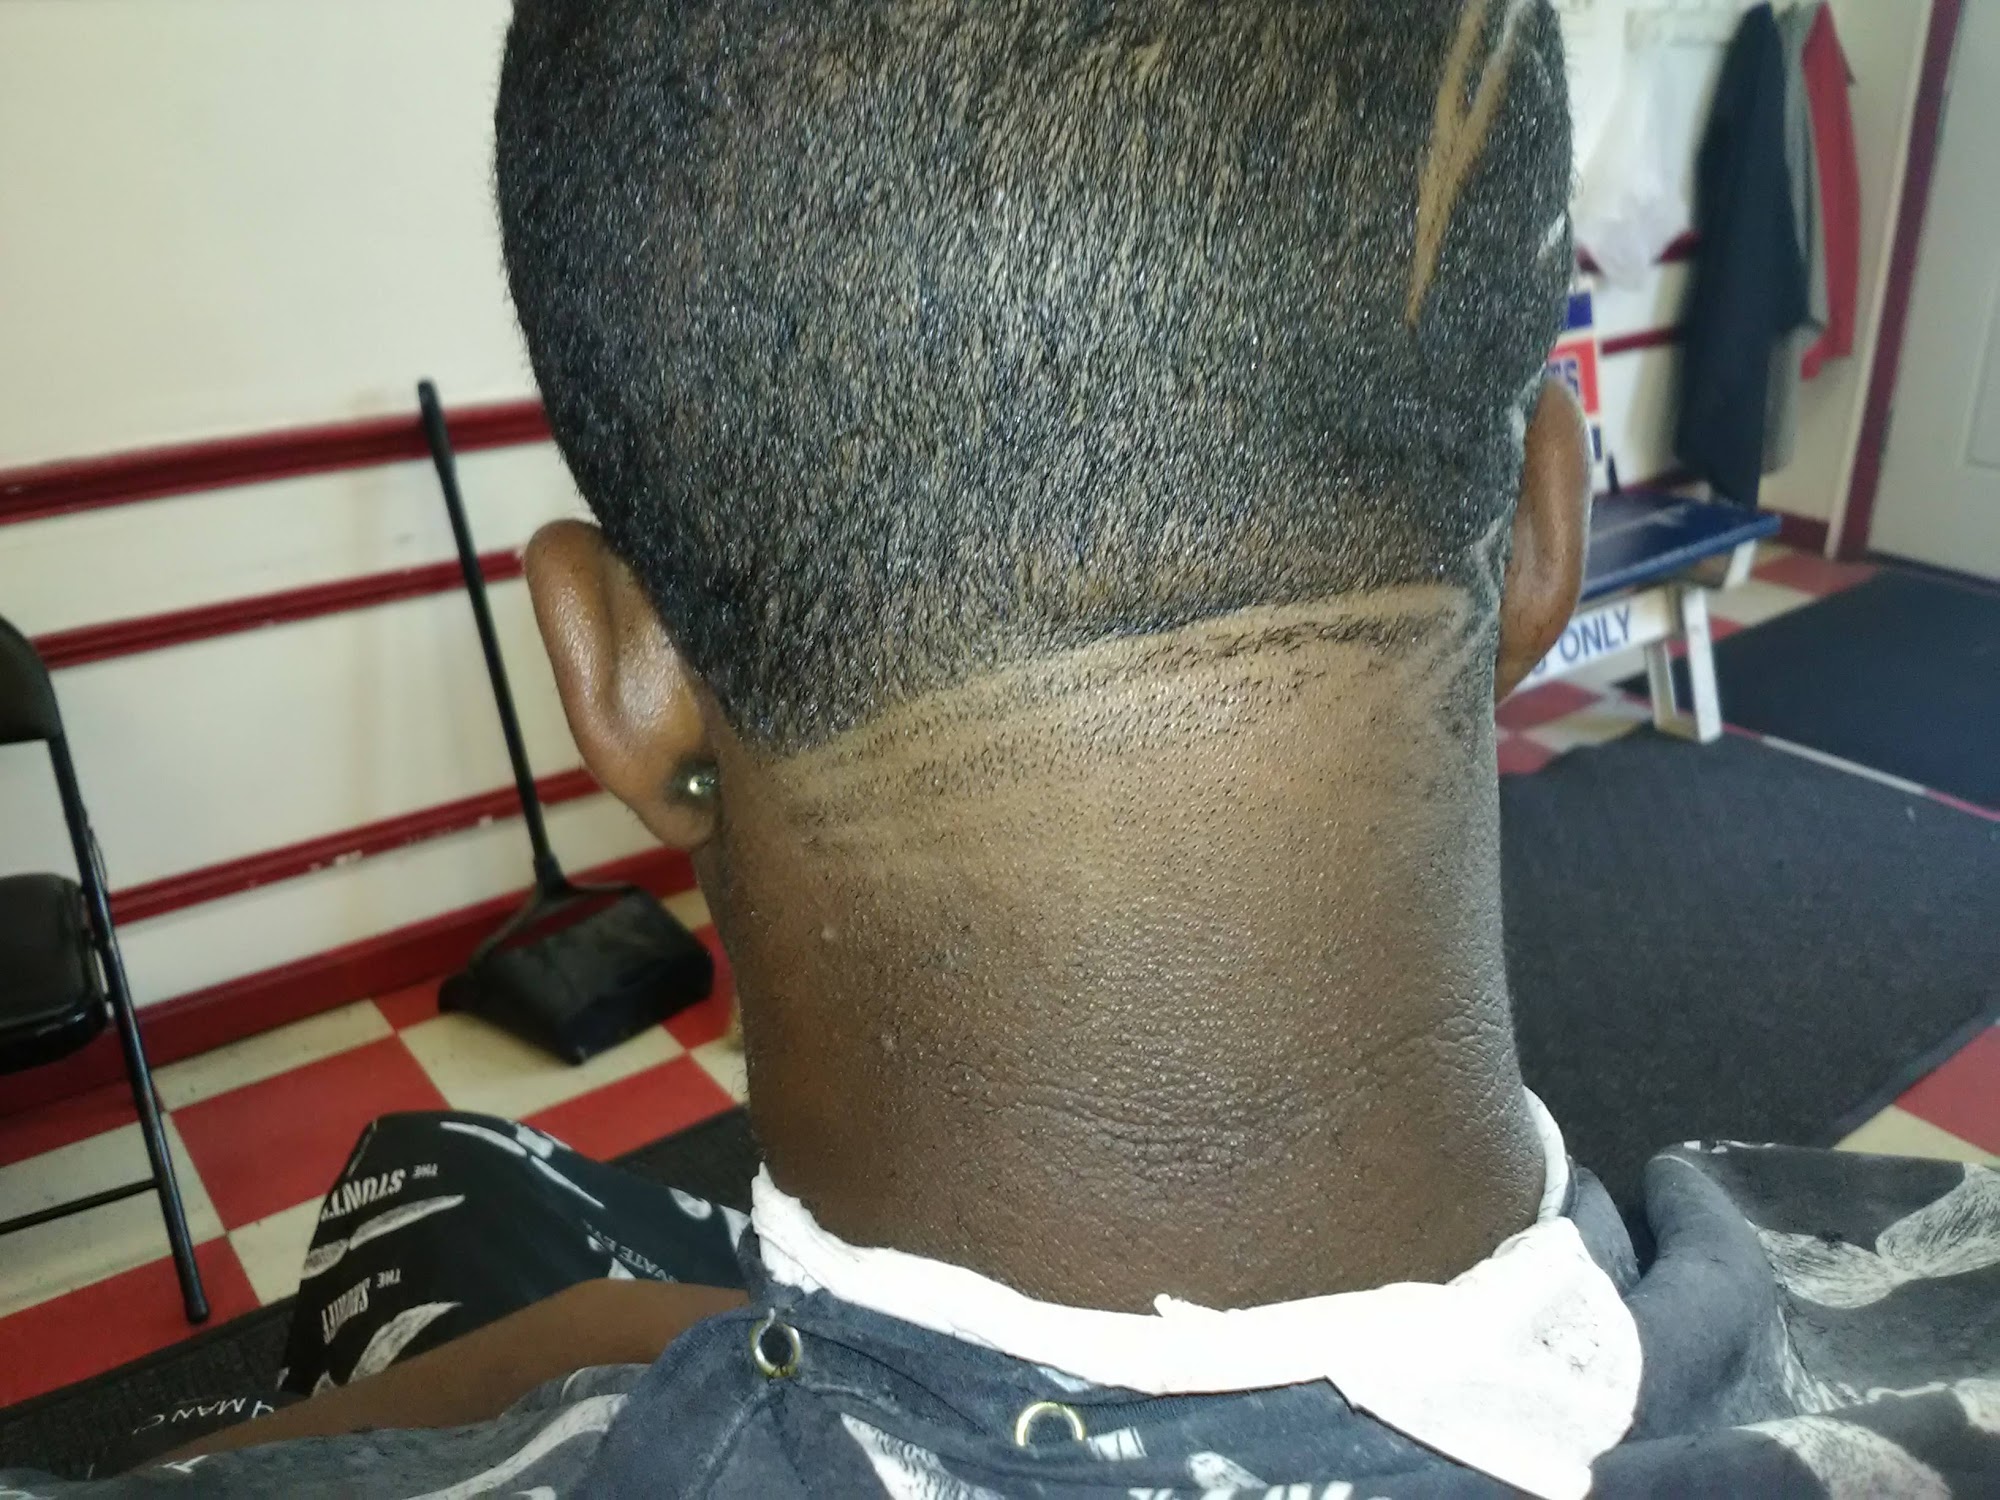 New Looks Barber Shop 415 Main St, Willimantic Connecticut 06226